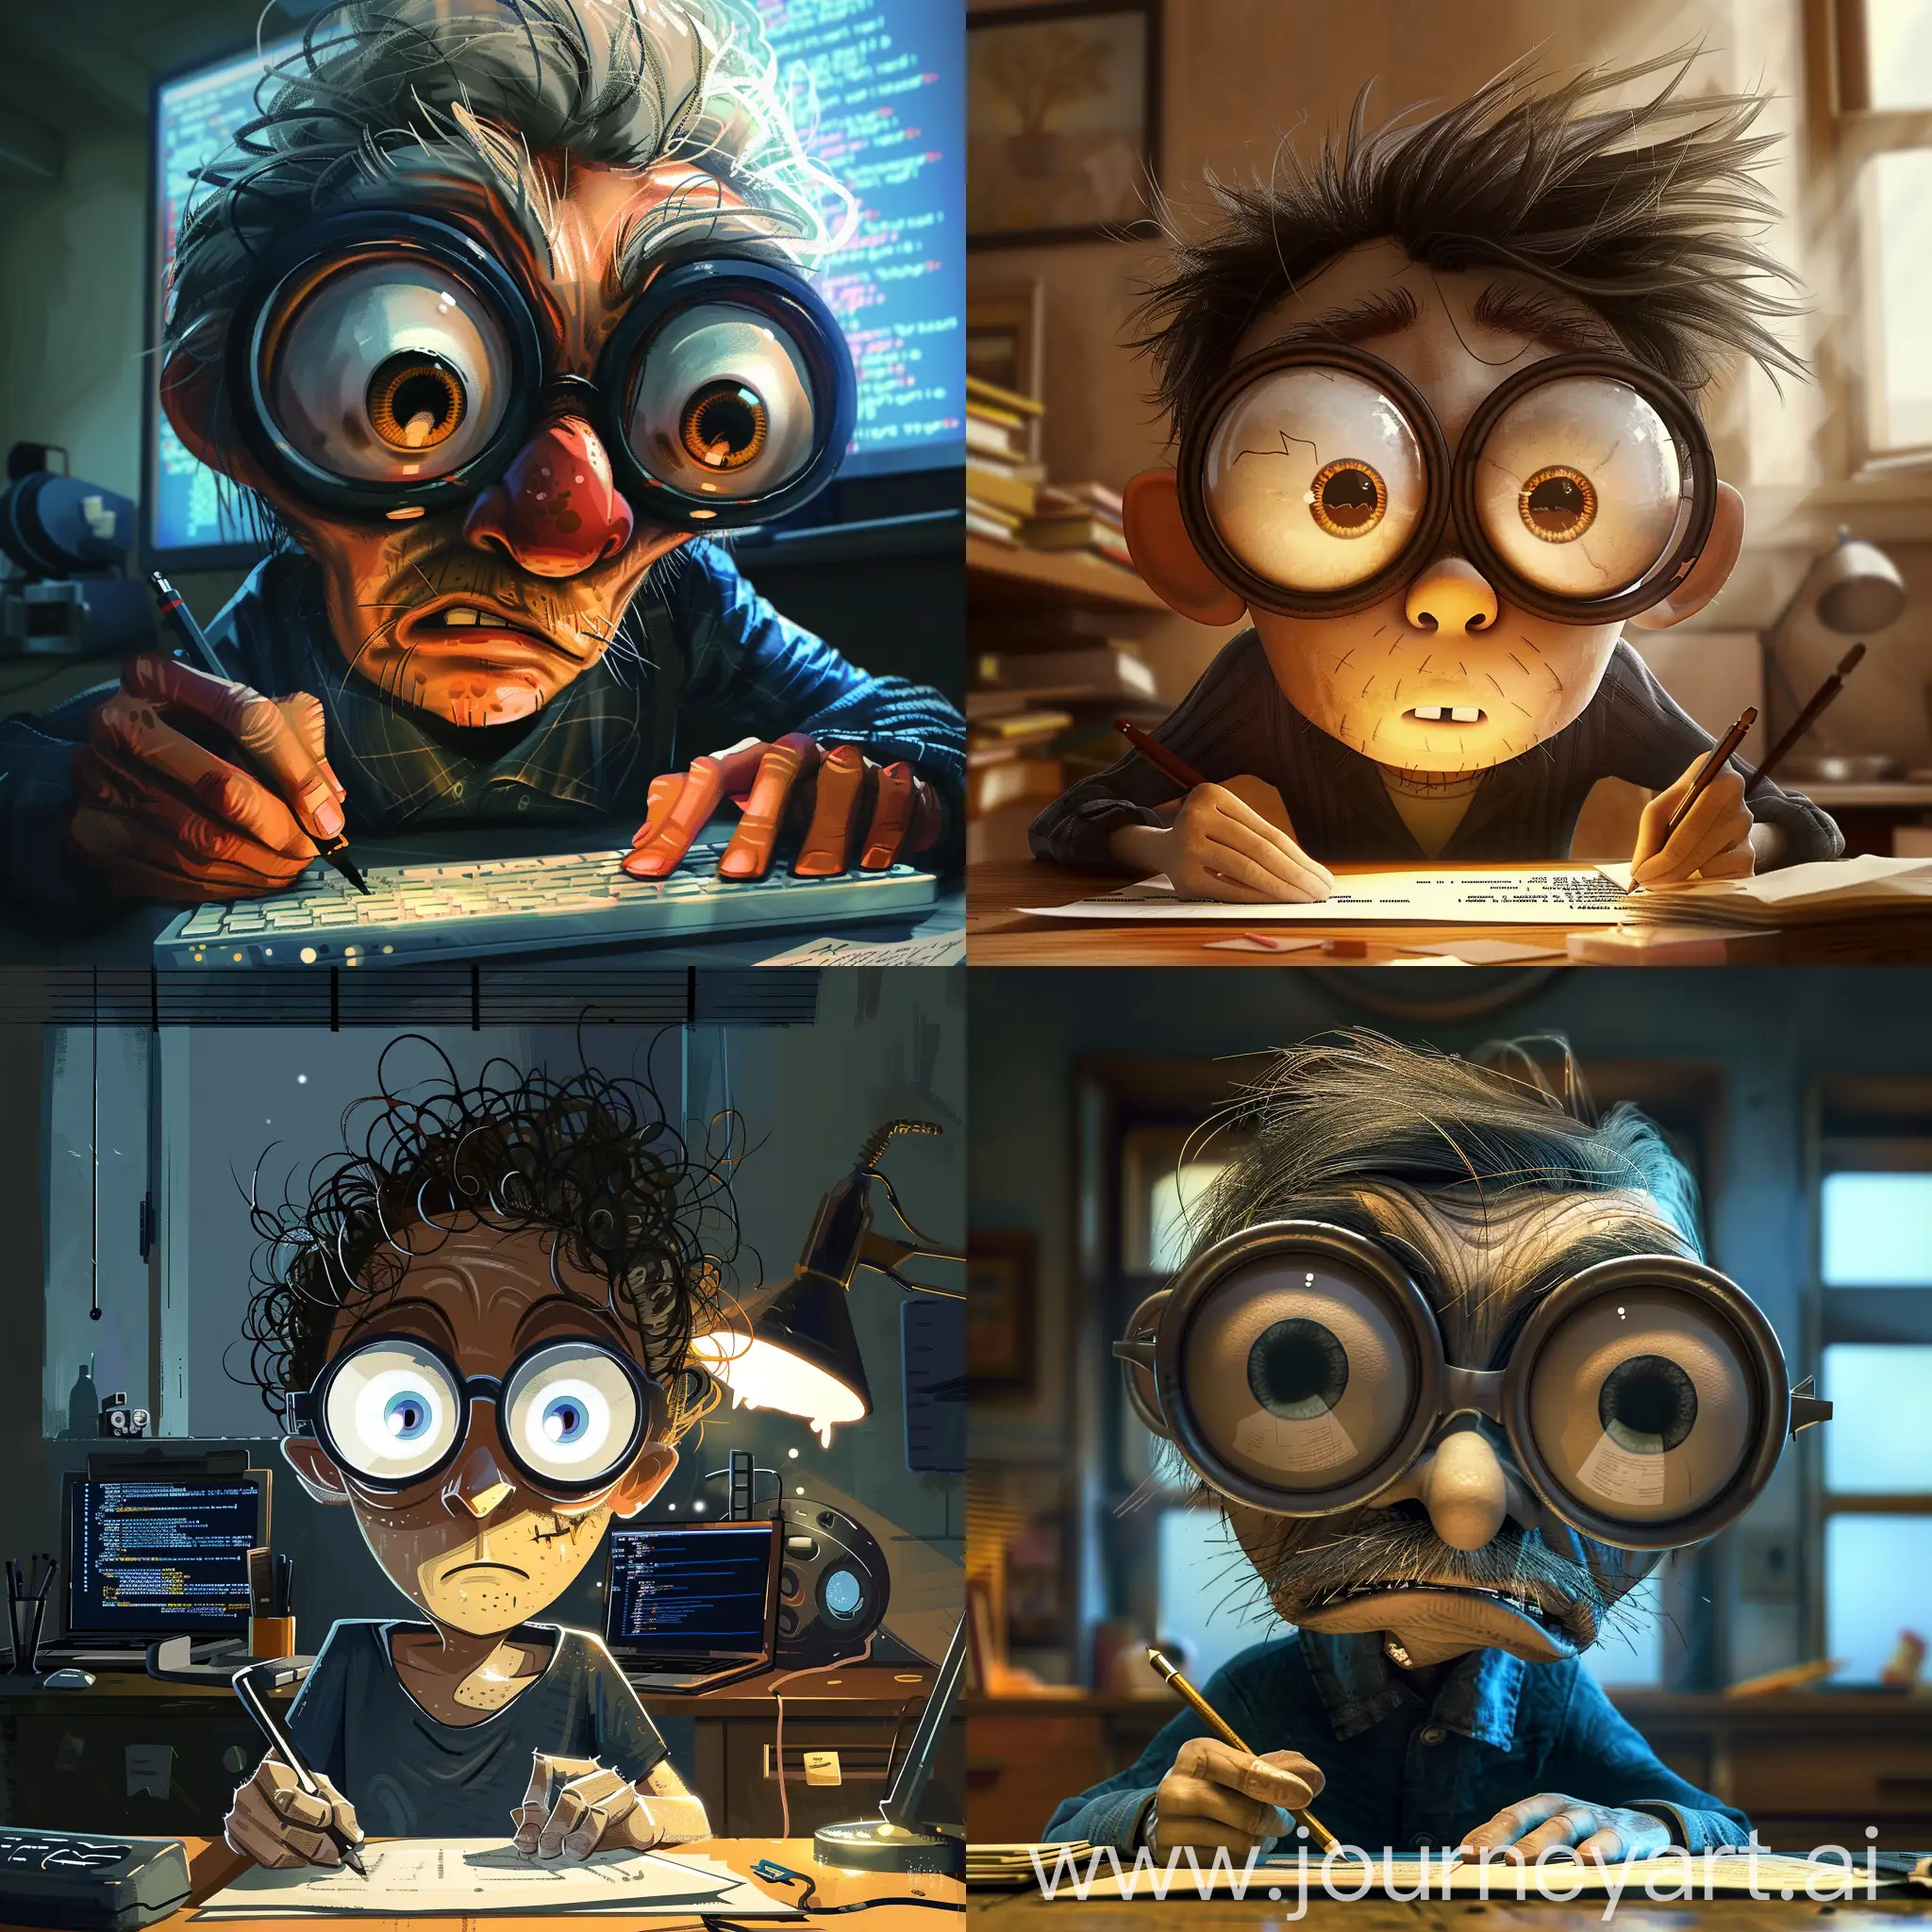 Quirky-Programmer-Writing-Code-with-Big-Eyes-and-Round-Glasses-in-Pixar-Style